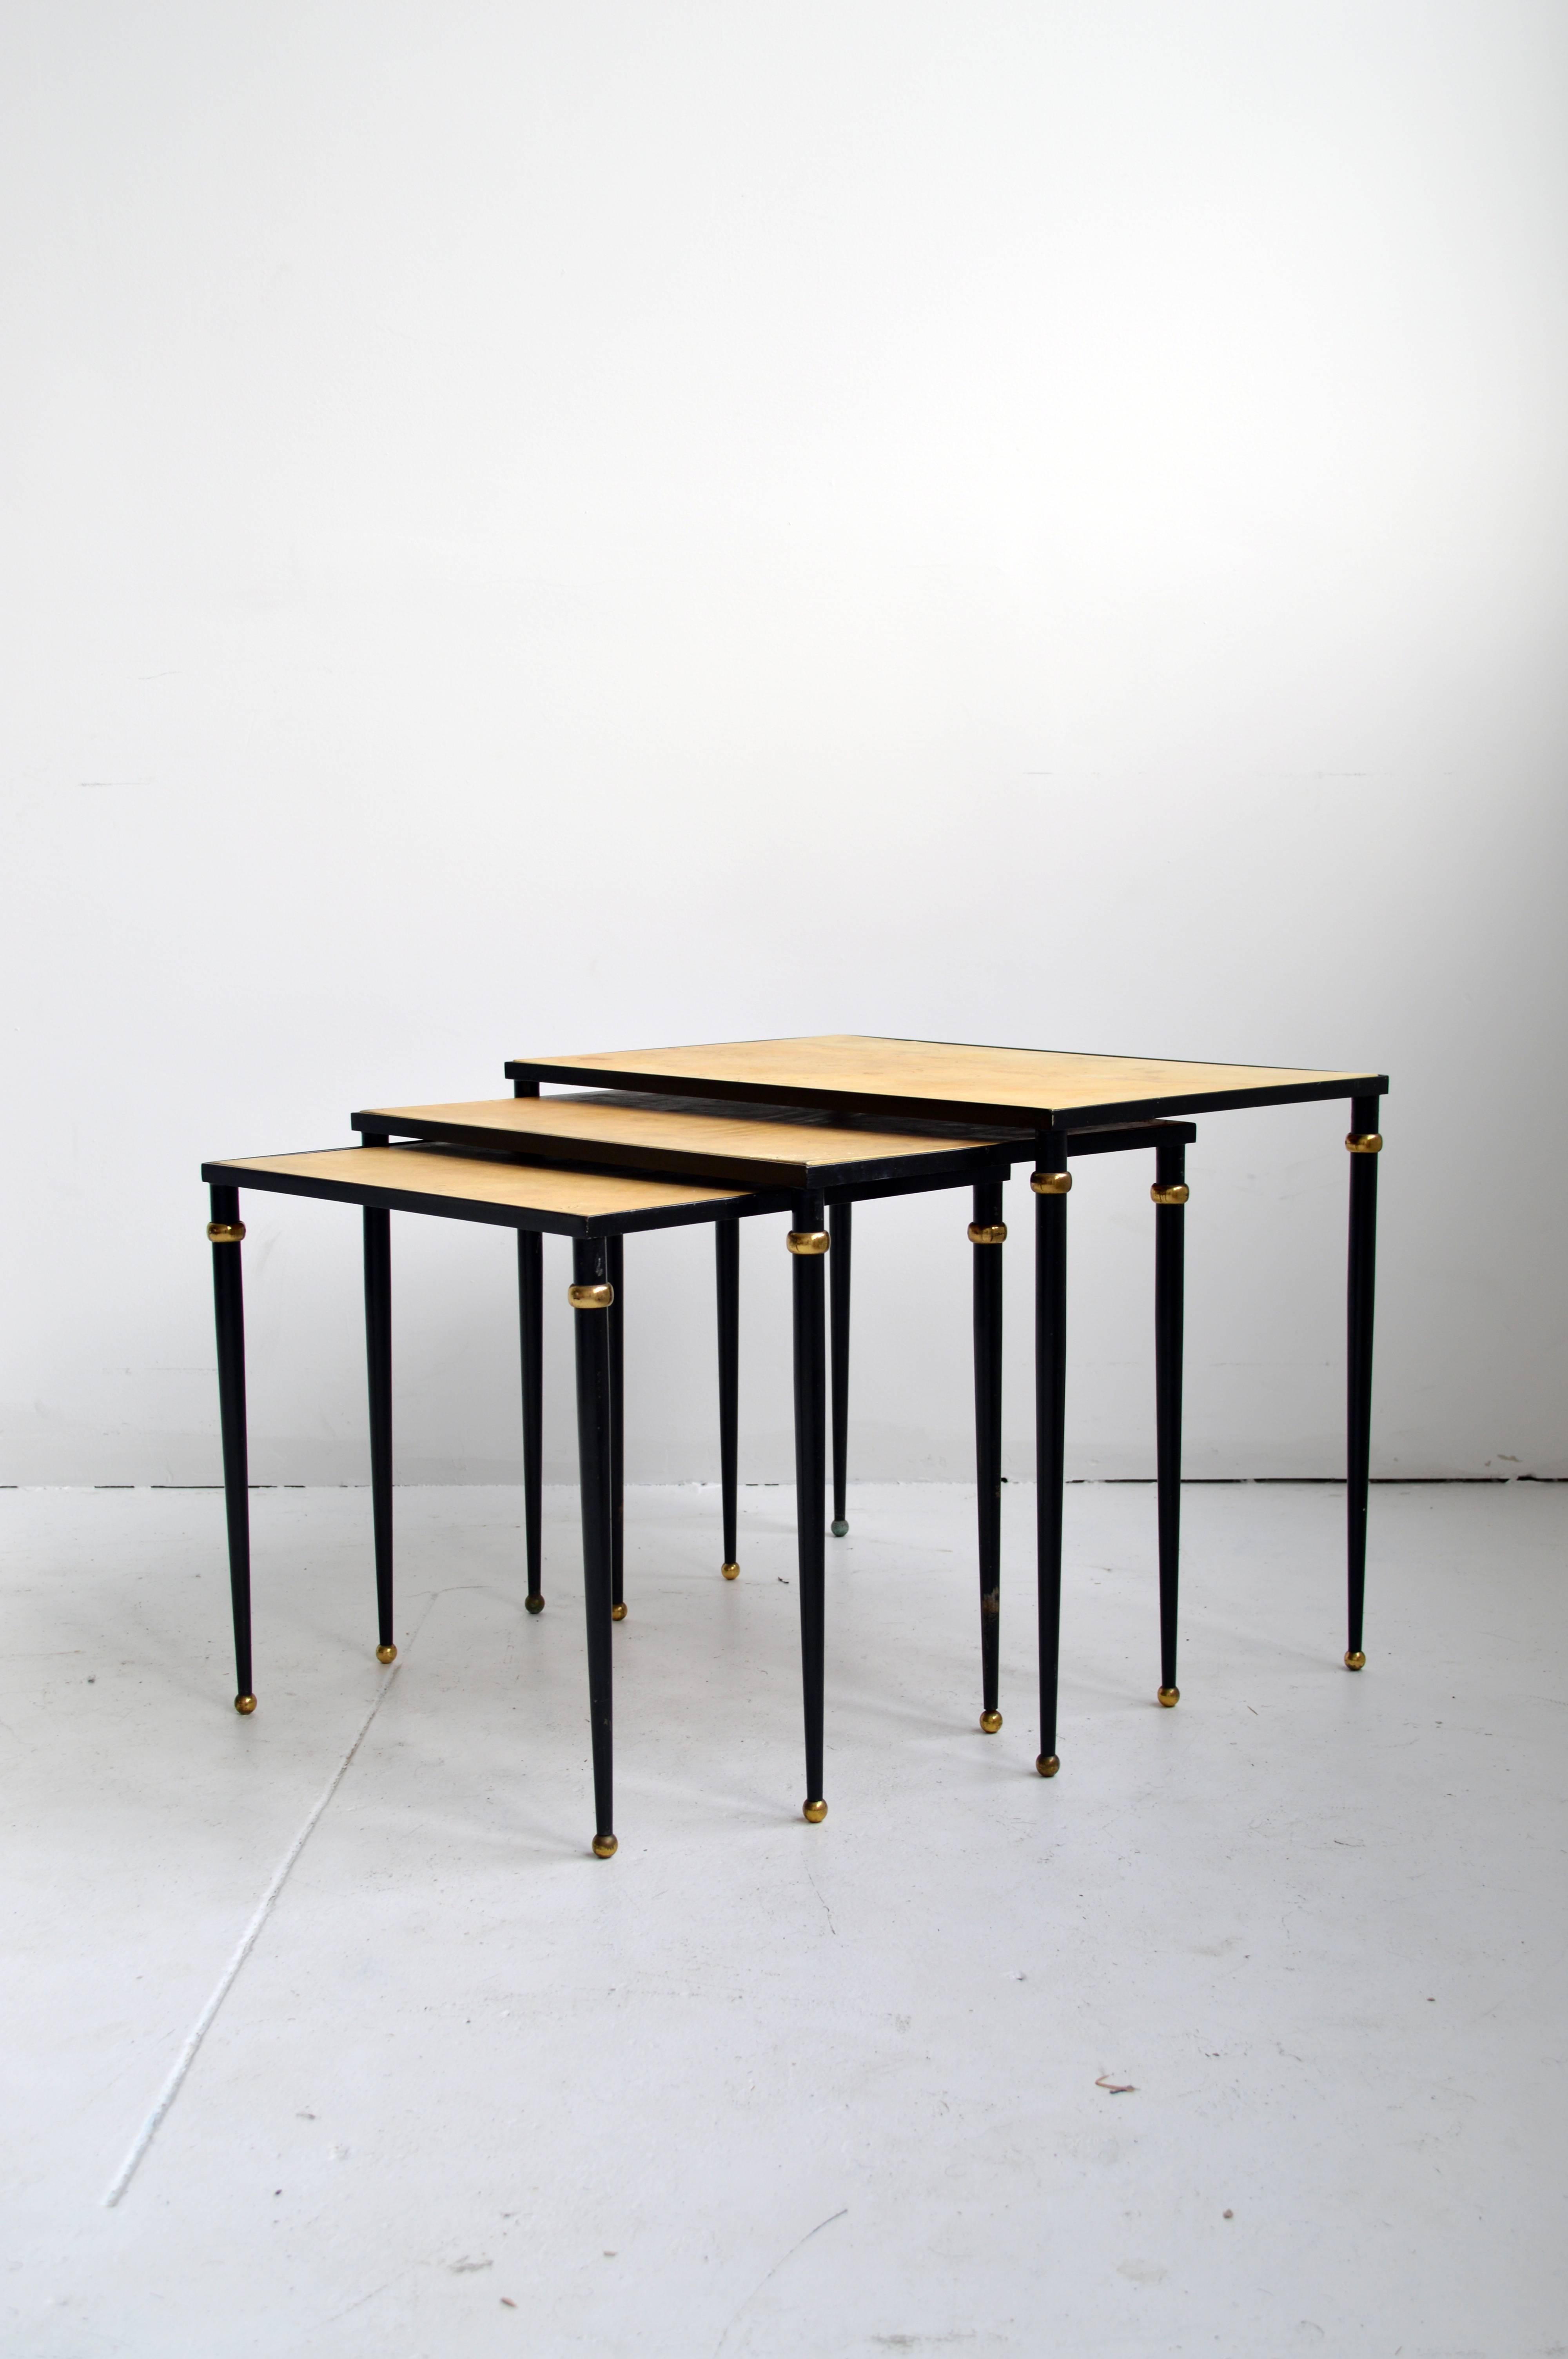 Three nesting tables with dark metal frame with brass details and inset parchment tops. Largest nesting table is missing one brass ring detail on leg.

Offered by Neal Beckstedt